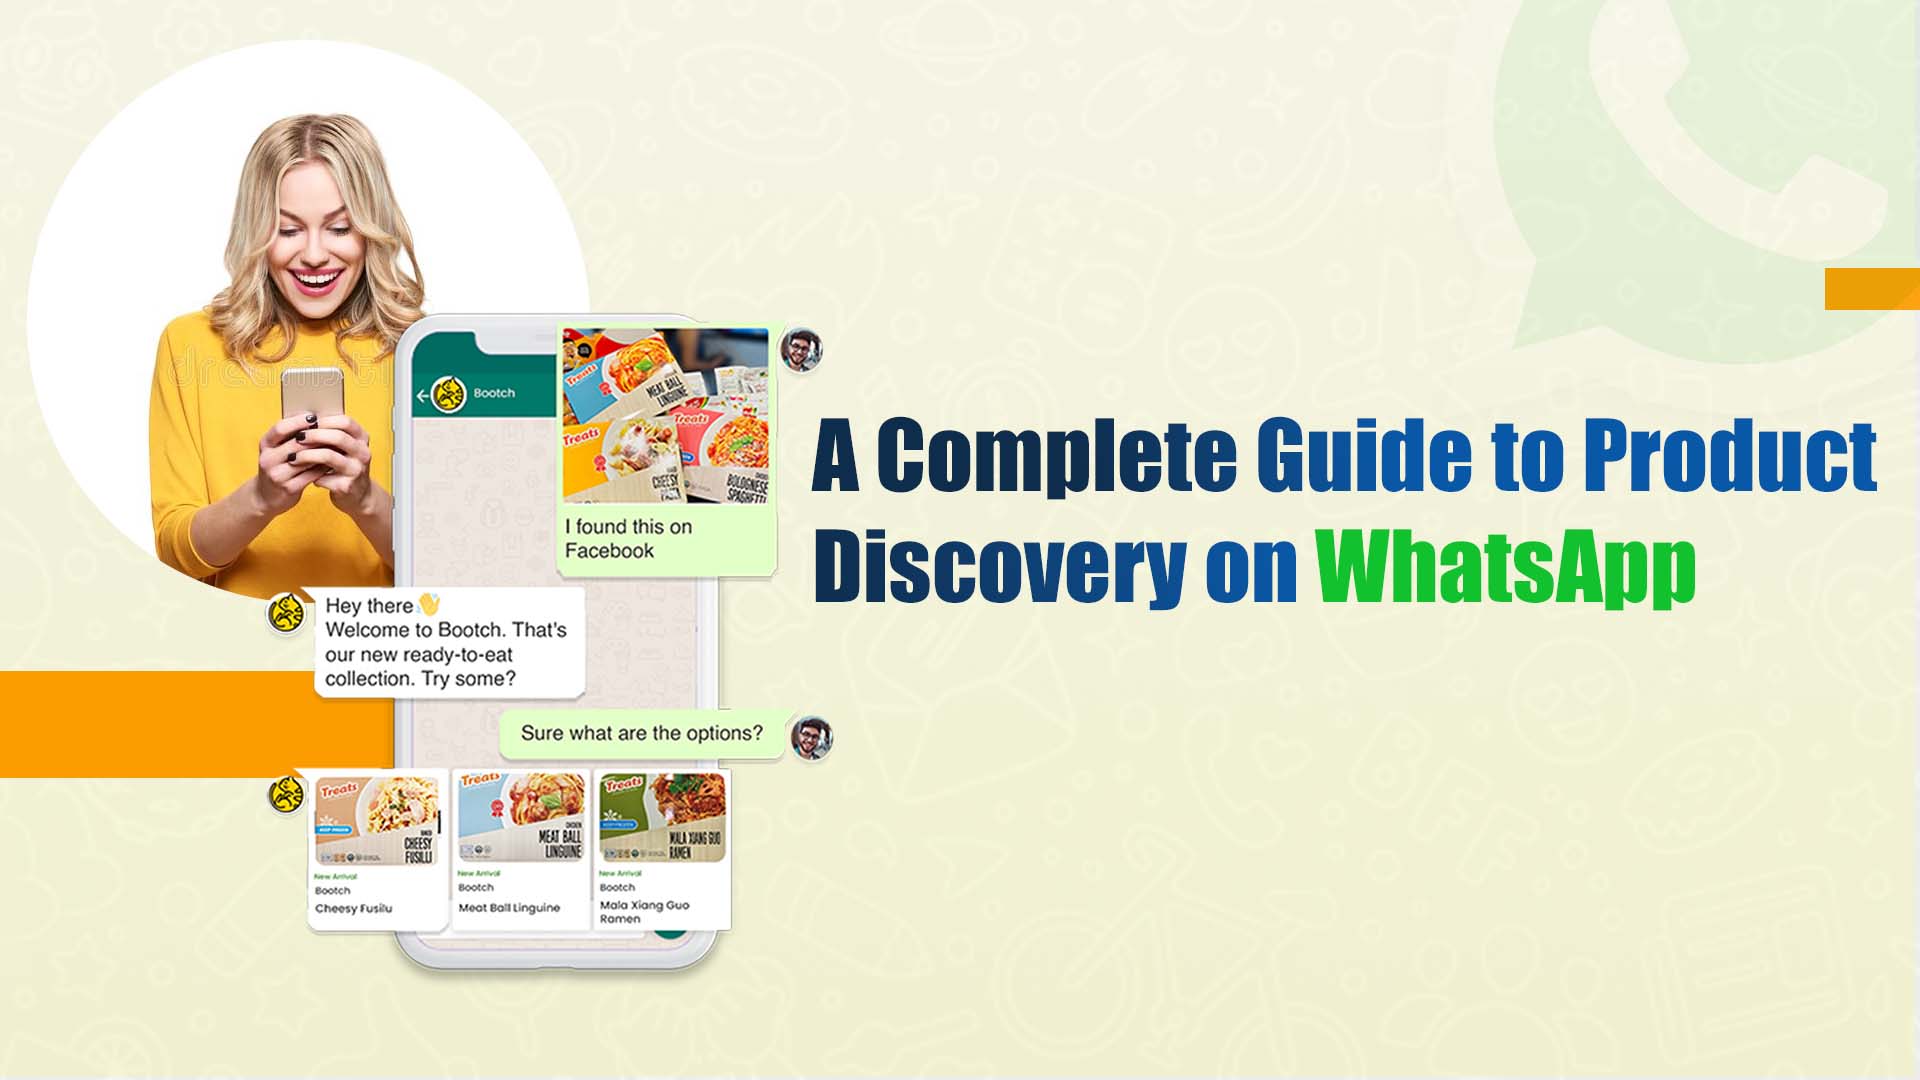 A Complete Guide to Product Discovery on WhatsApp